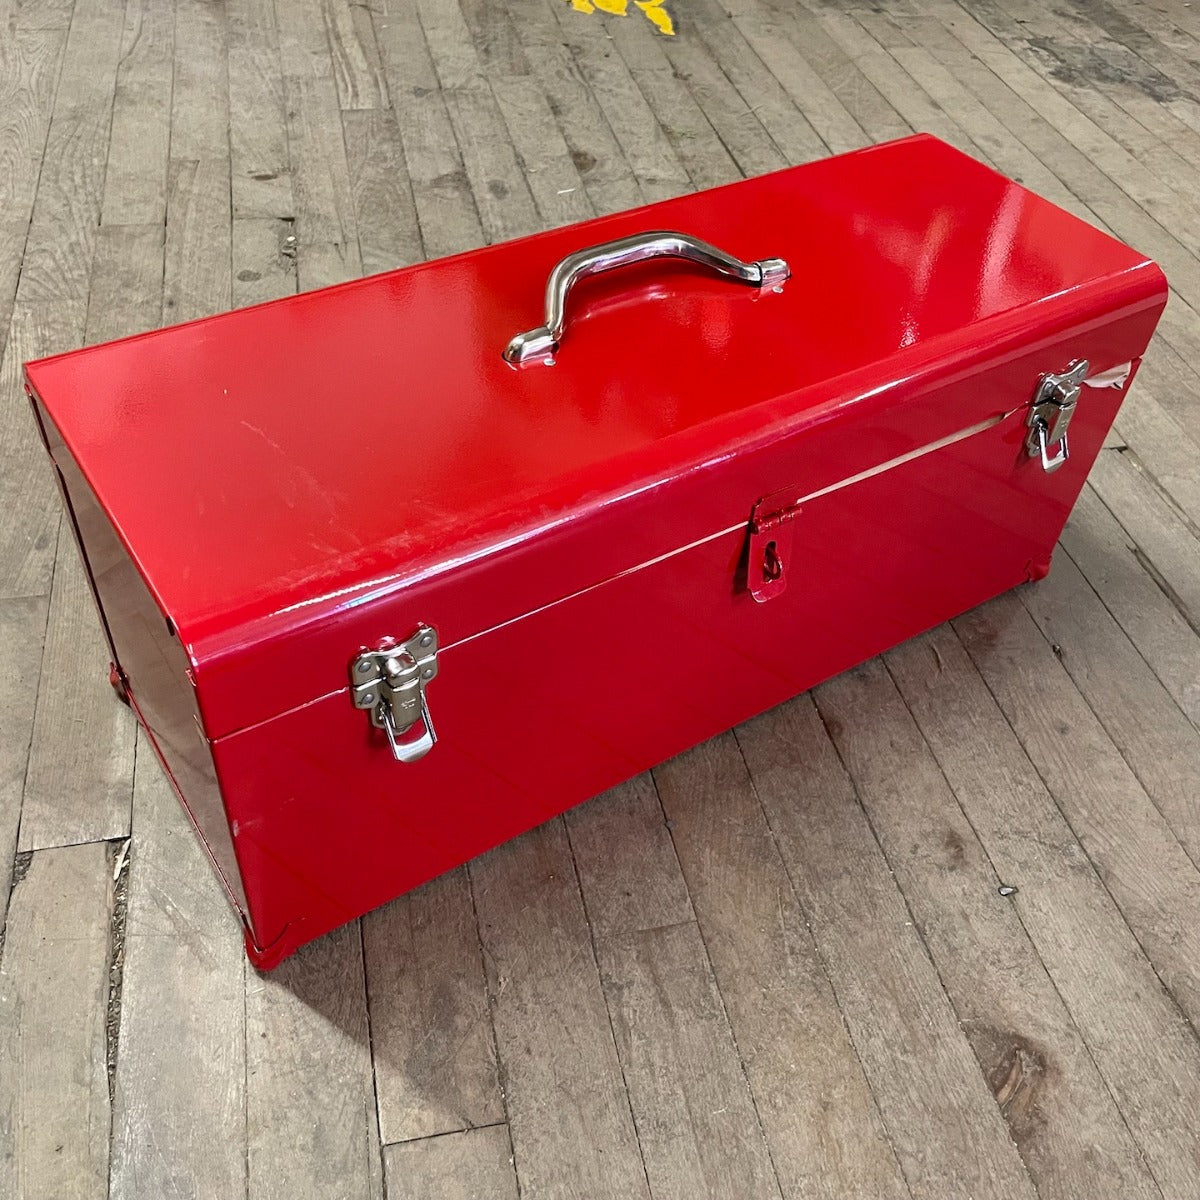 Valley Red Metal Tool Box w/ Handle and Tray 22 1/2 x 8 1/2 x 9 (VRMTB)